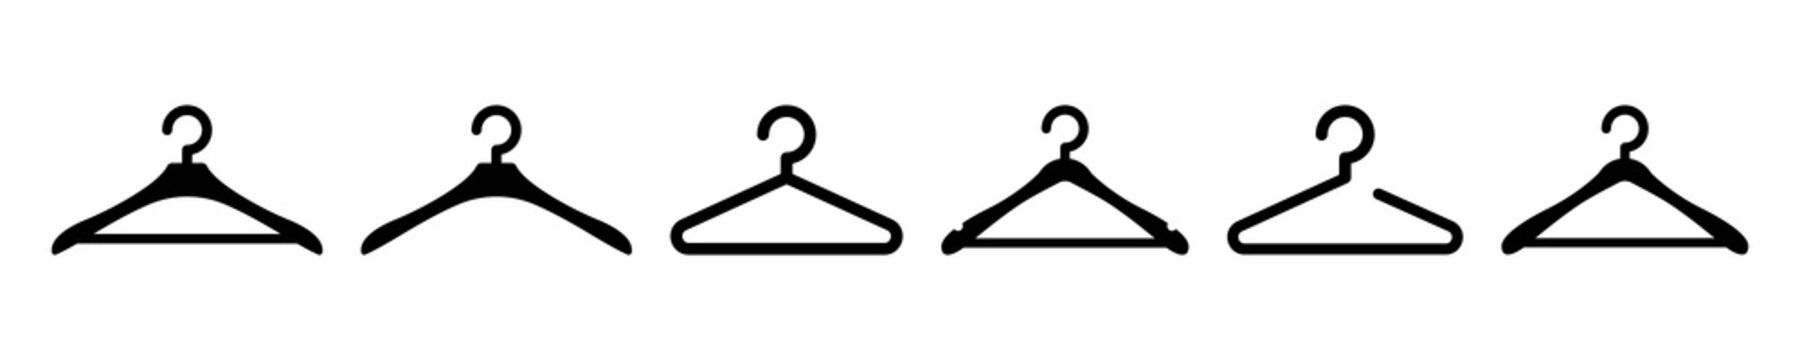 Set of clothes hanger vector icons. Hanger for cloakroom or closet. Hang for coat, shirt or suit. Vector 10 EPS.